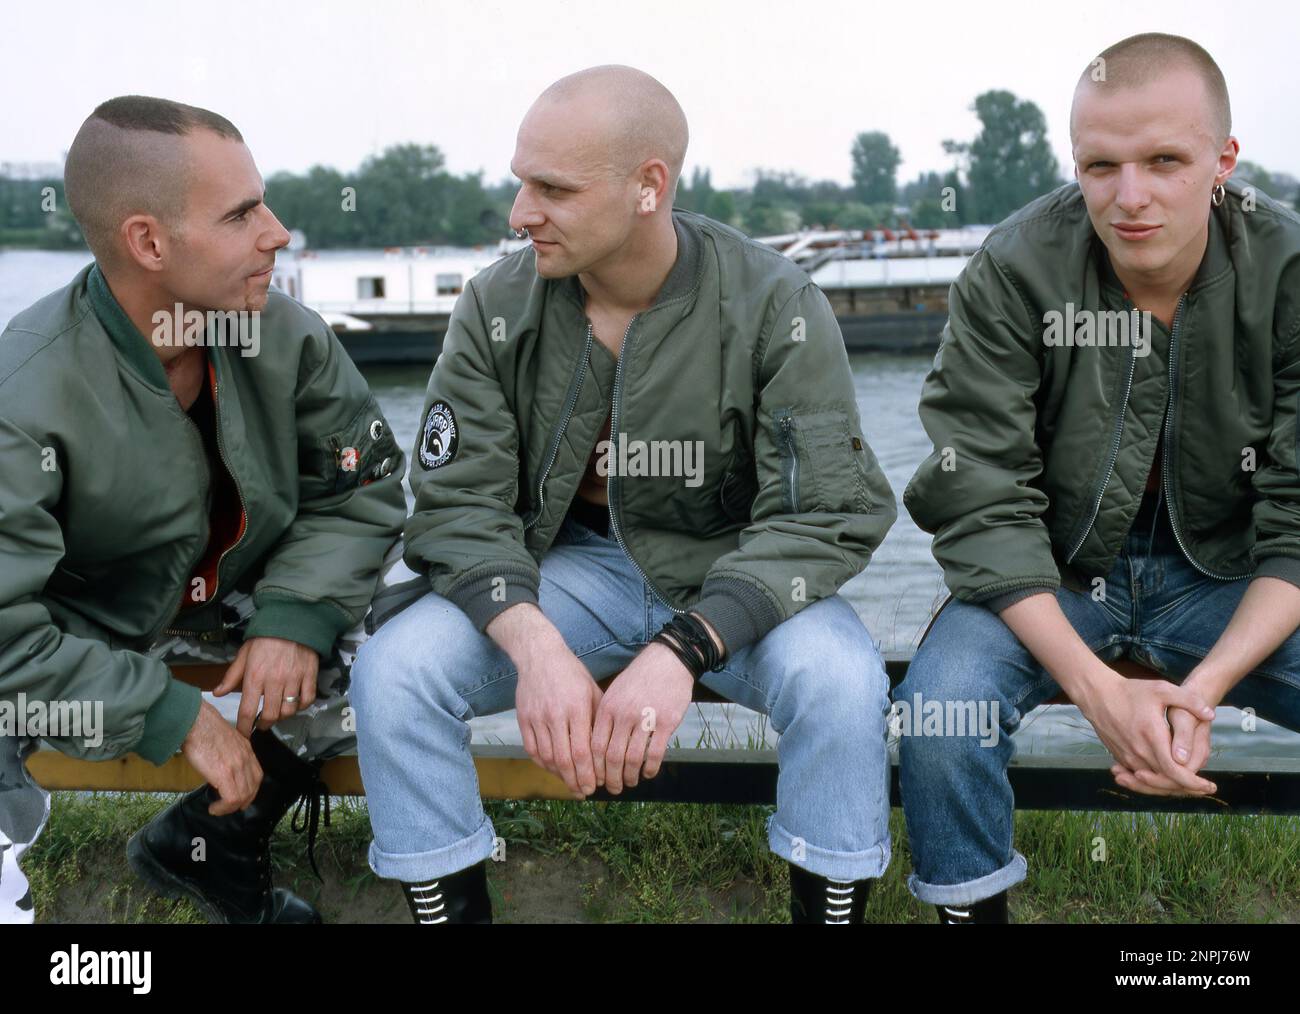 Three Skinheads from the 90's Stock Photo